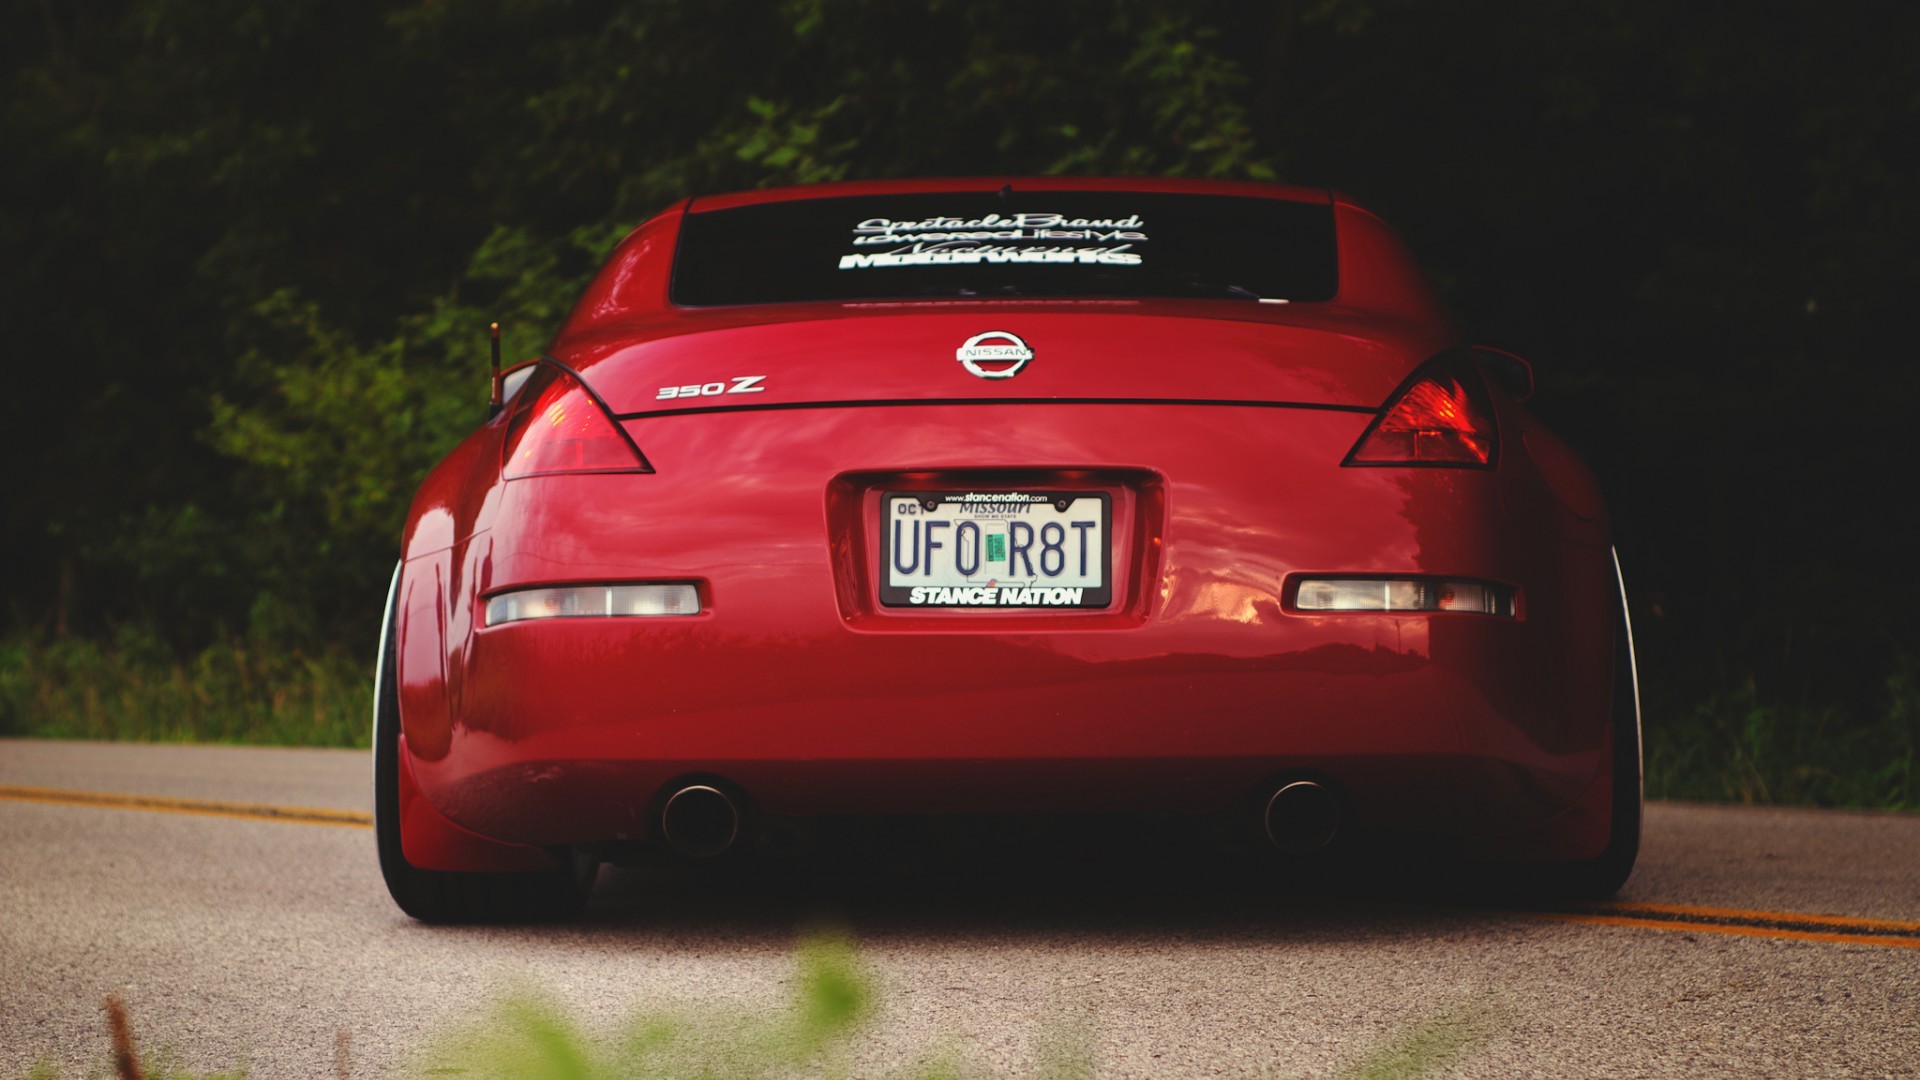 General 1920x1080 car Nissan Nissan 350Z Nissan Fairlady Z rear view vehicle red cars